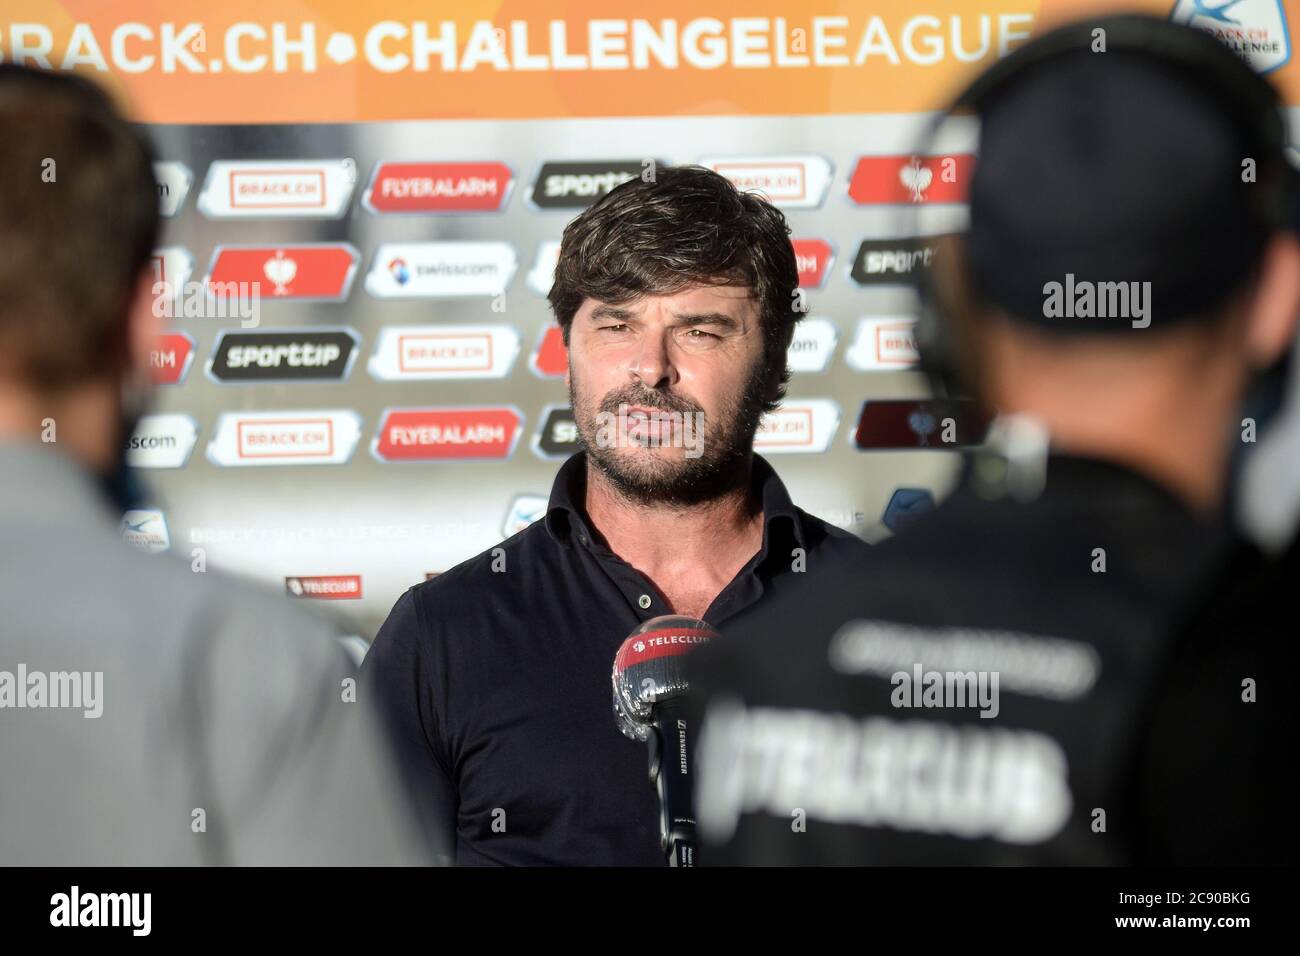 Wil, Schweiz. 27th July, 2020. 27.07.2020, Wil, IGP Arena, Fc Wil vs GCZ, Wil Coach Ciriaco Sforza interviewed before the game Credit: SPP Sport Press Photo. /Alamy Live News Stock Photo